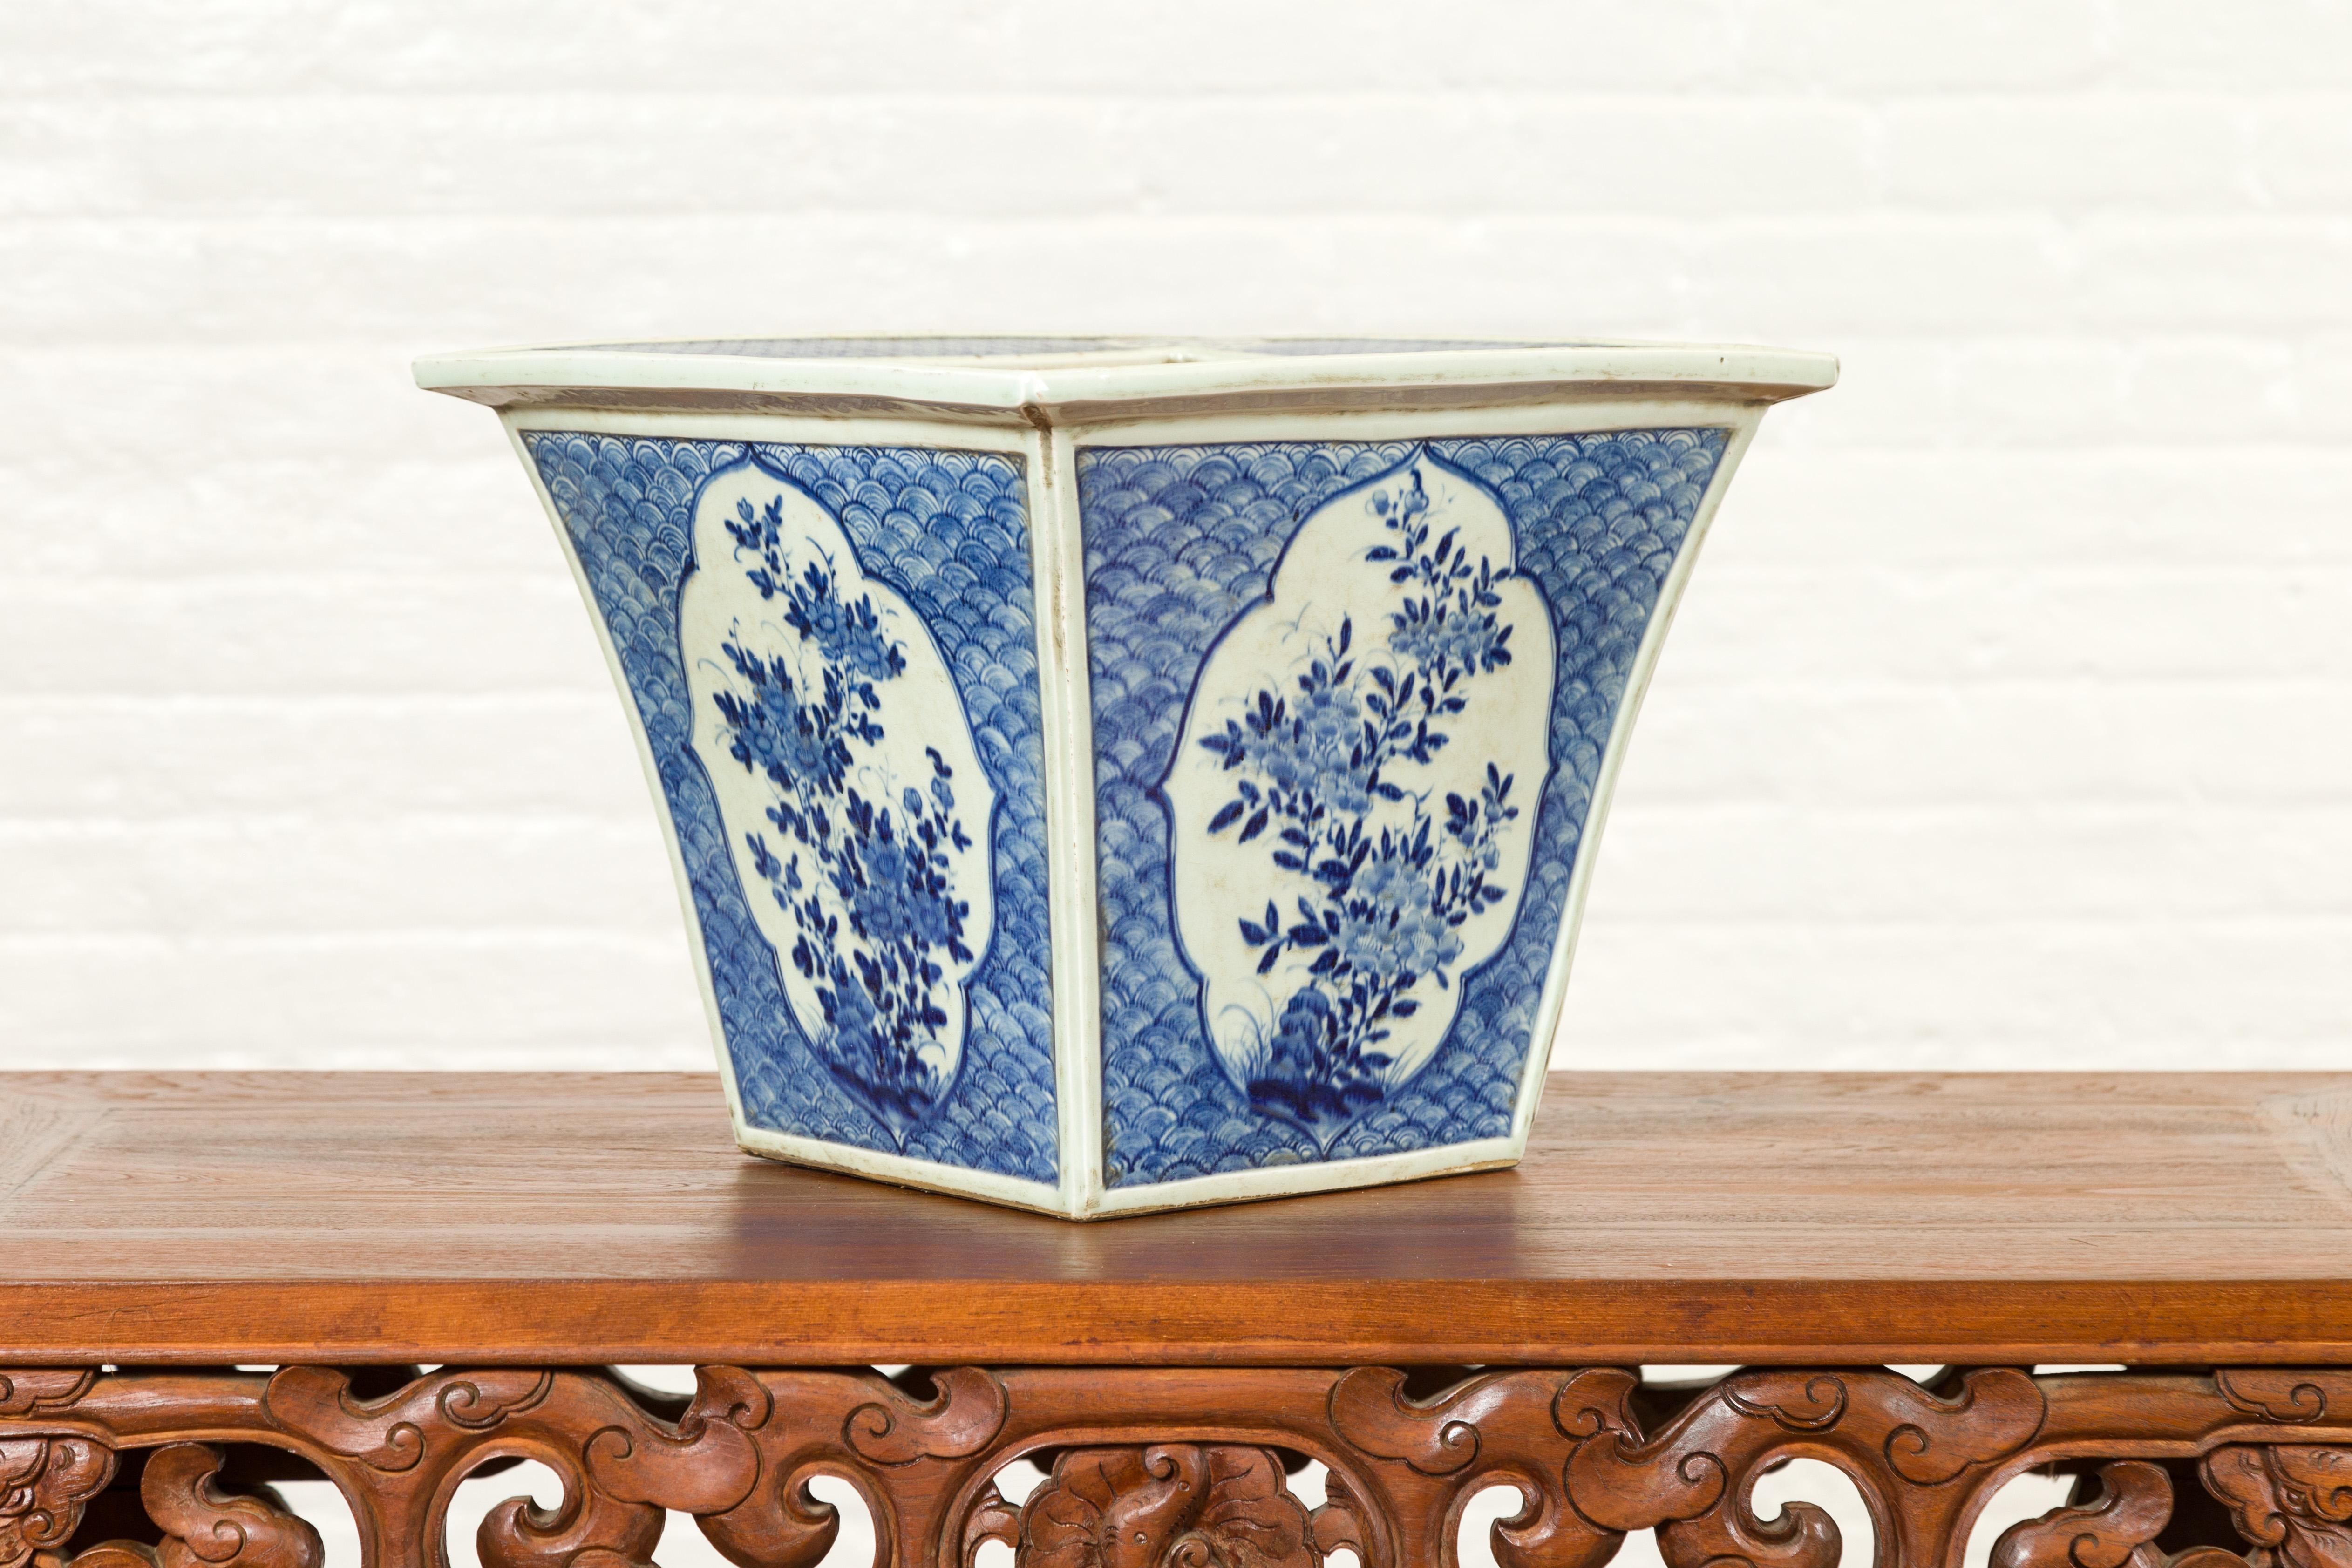 Porcelain Chinese 19th Century Qing Dynasty Blue and White Planter with Floral Décor